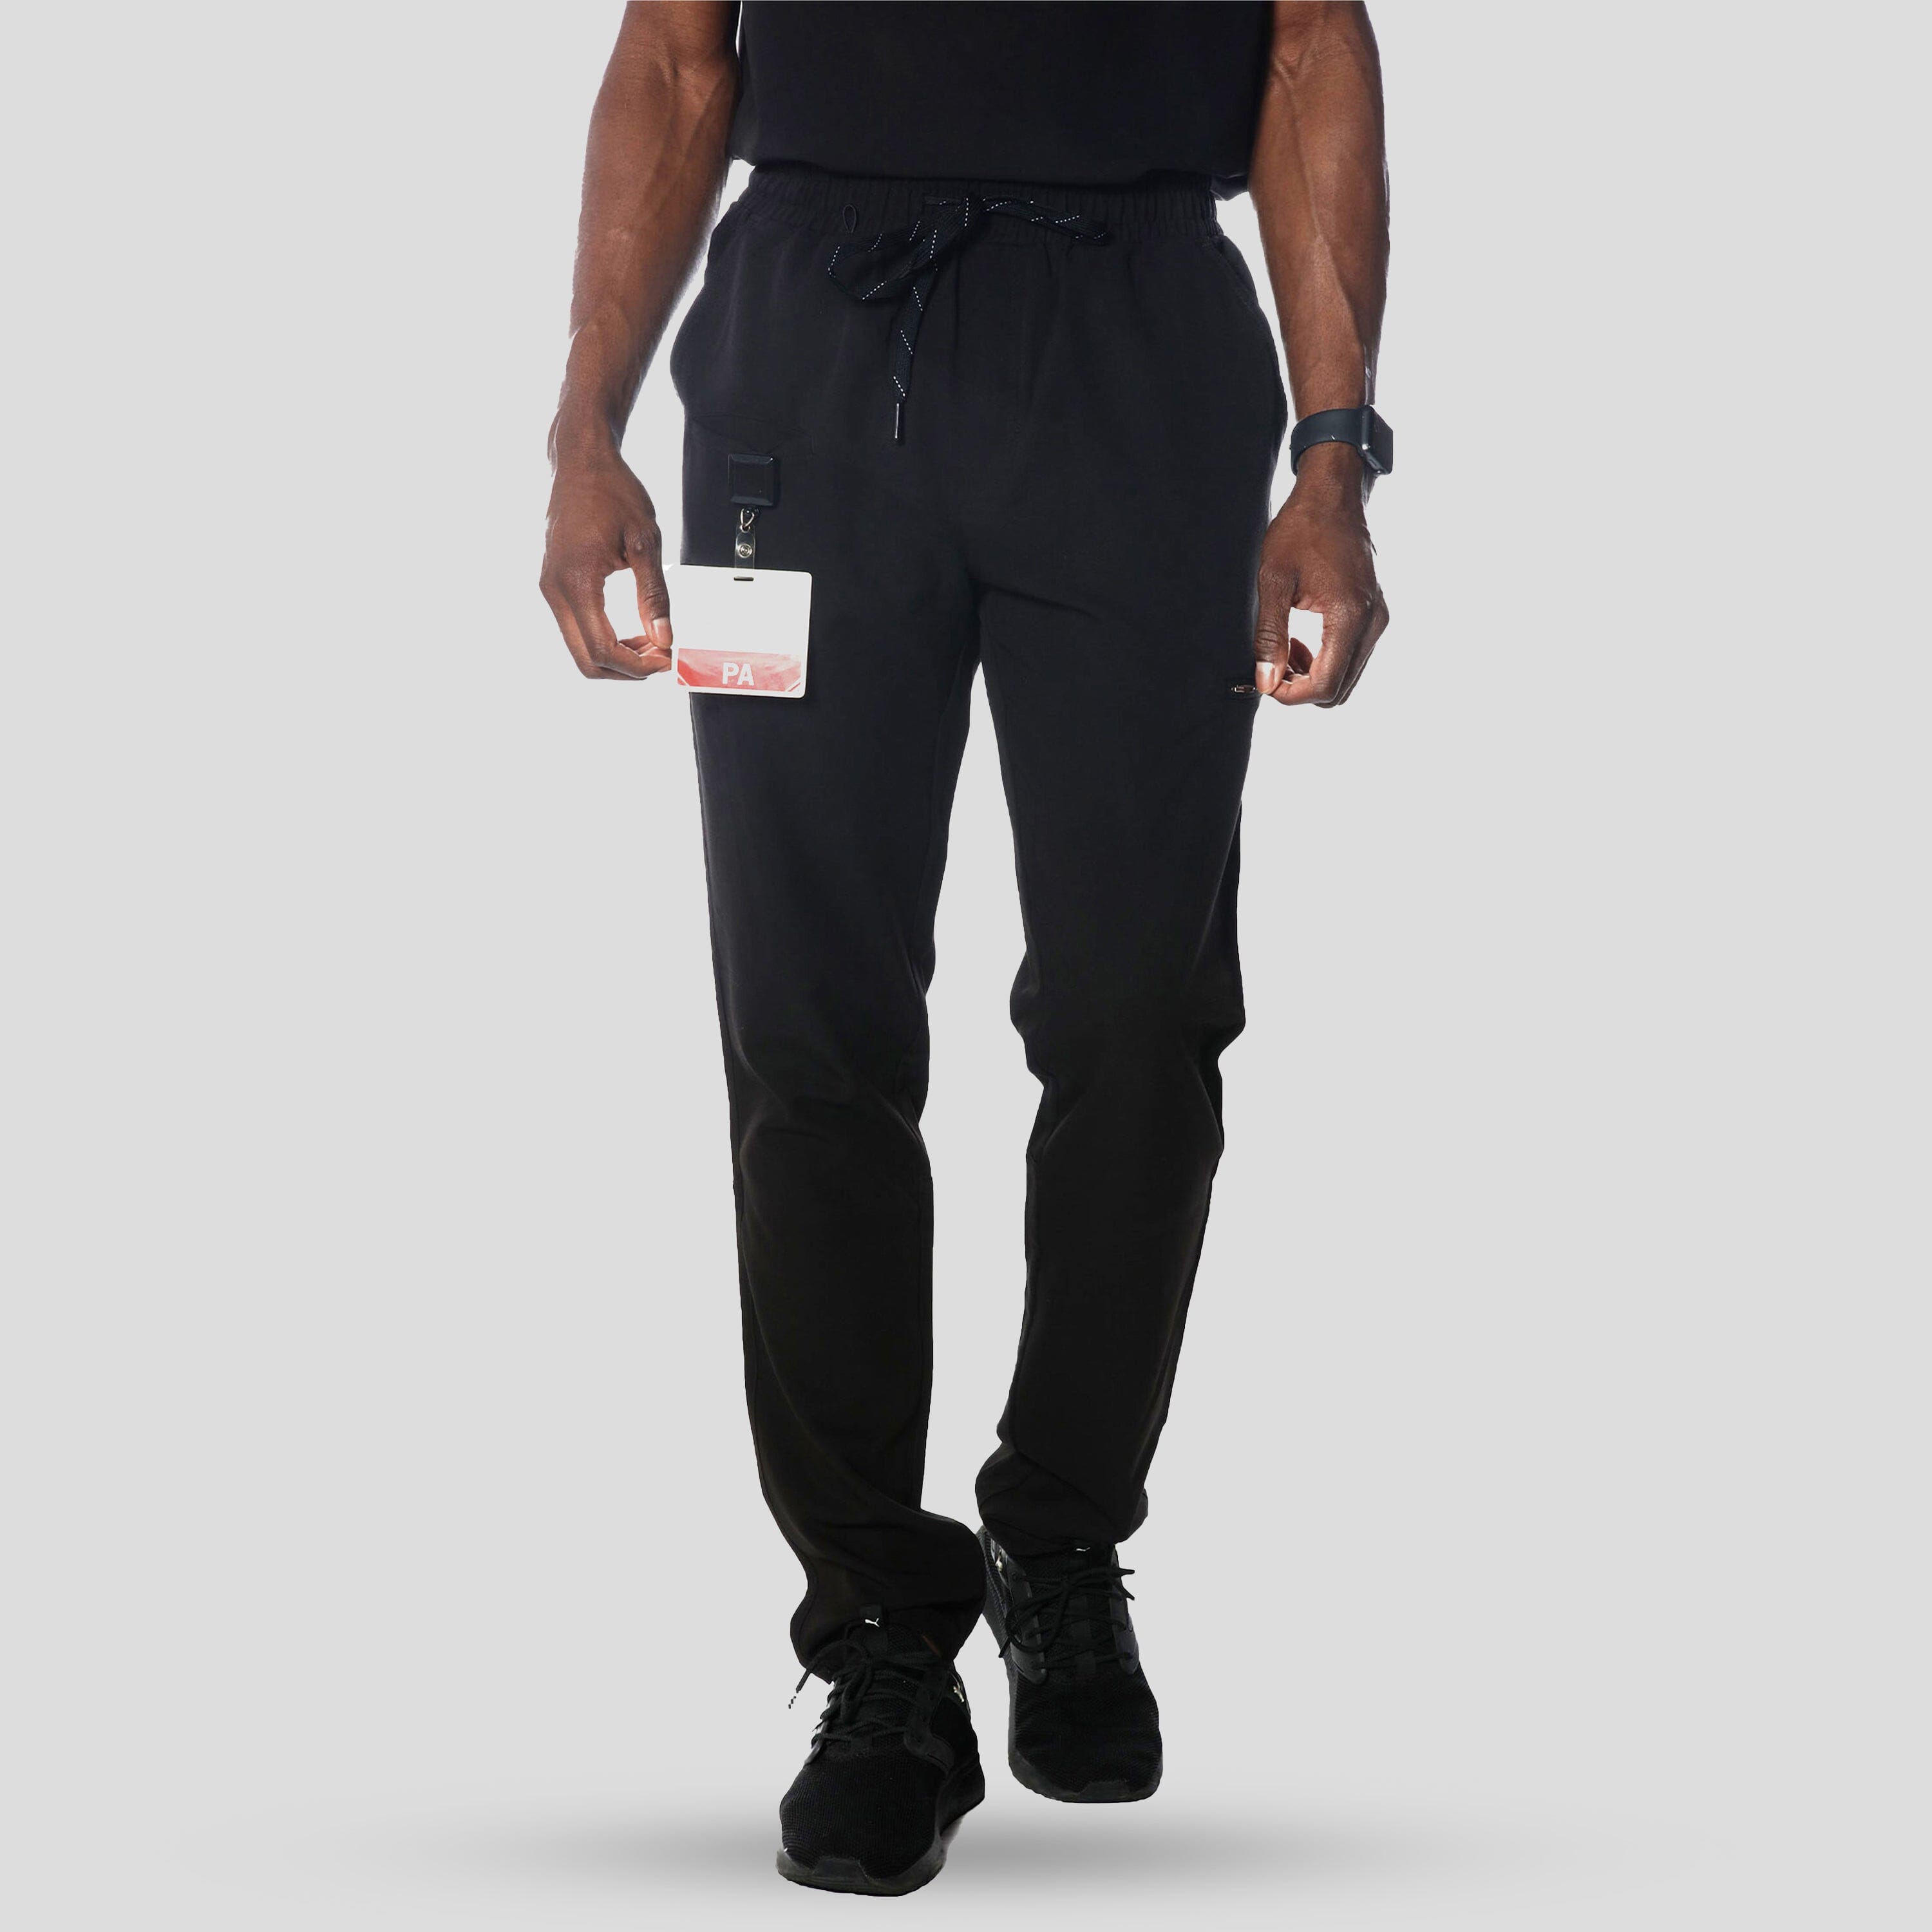 Black Scrub Pants No known flaws, the pants are a - Depop